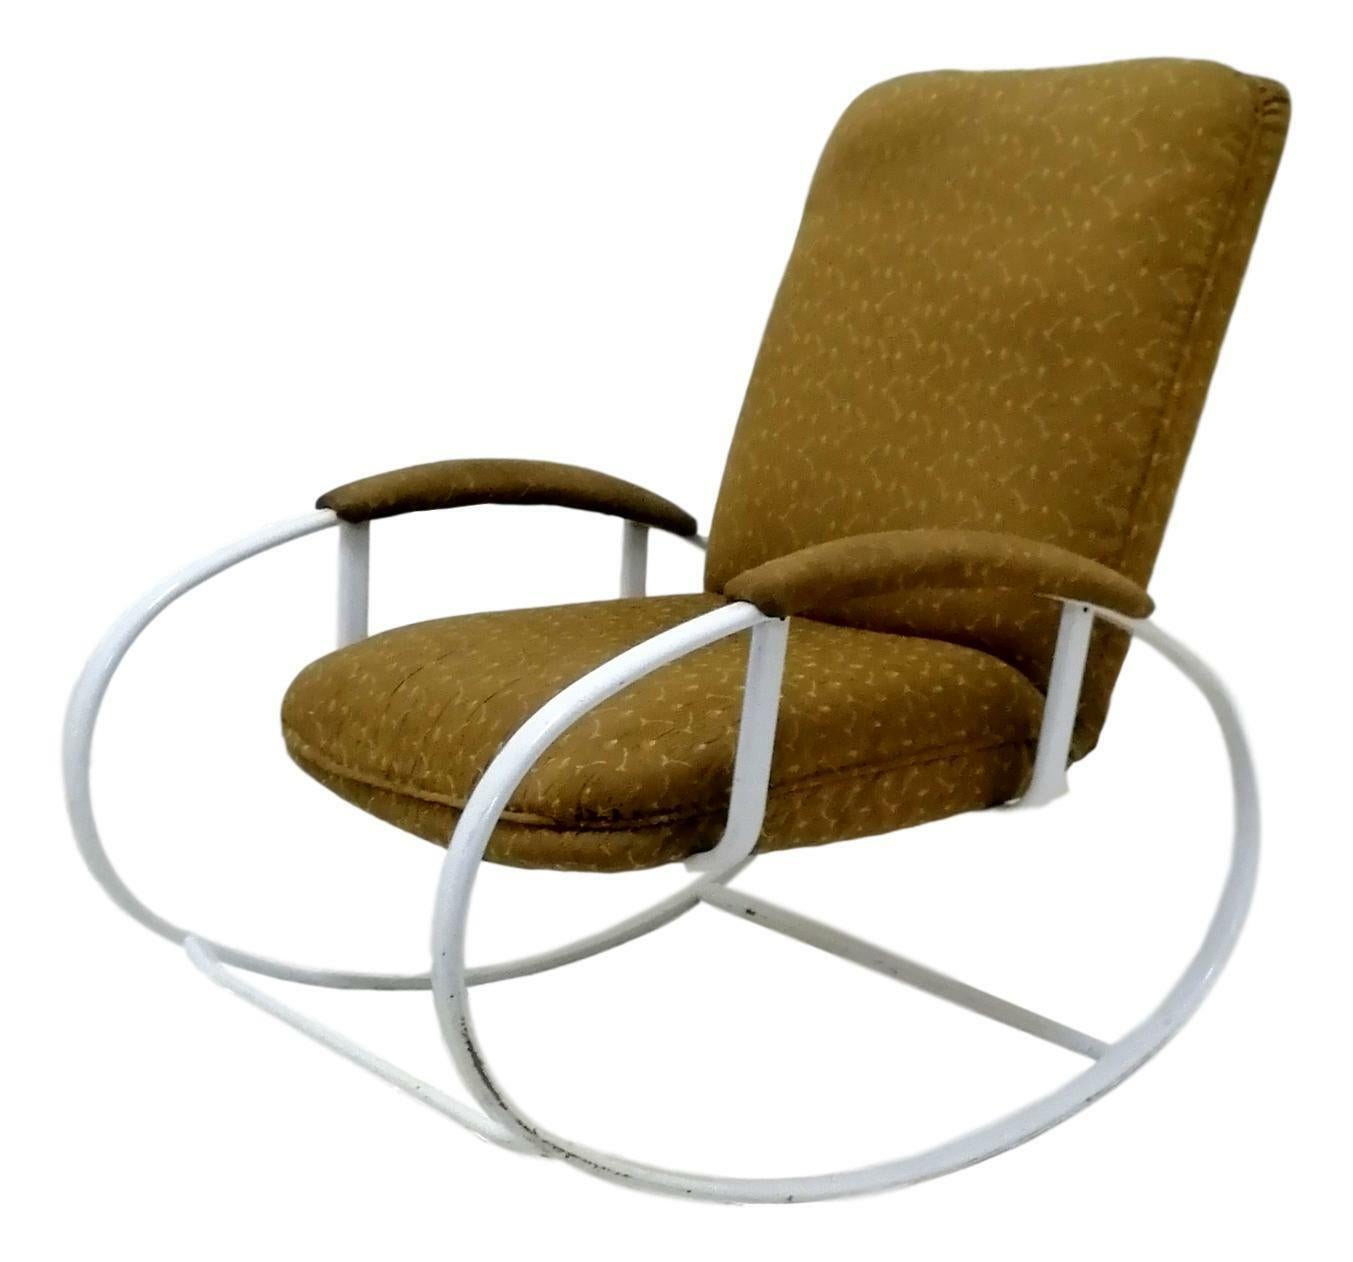 Original rocking chair from the 70s, probably attributed to renato zevi design, on a white lacquered metal structure and fabric upholstery

Good overall condition, as shown in the photos.